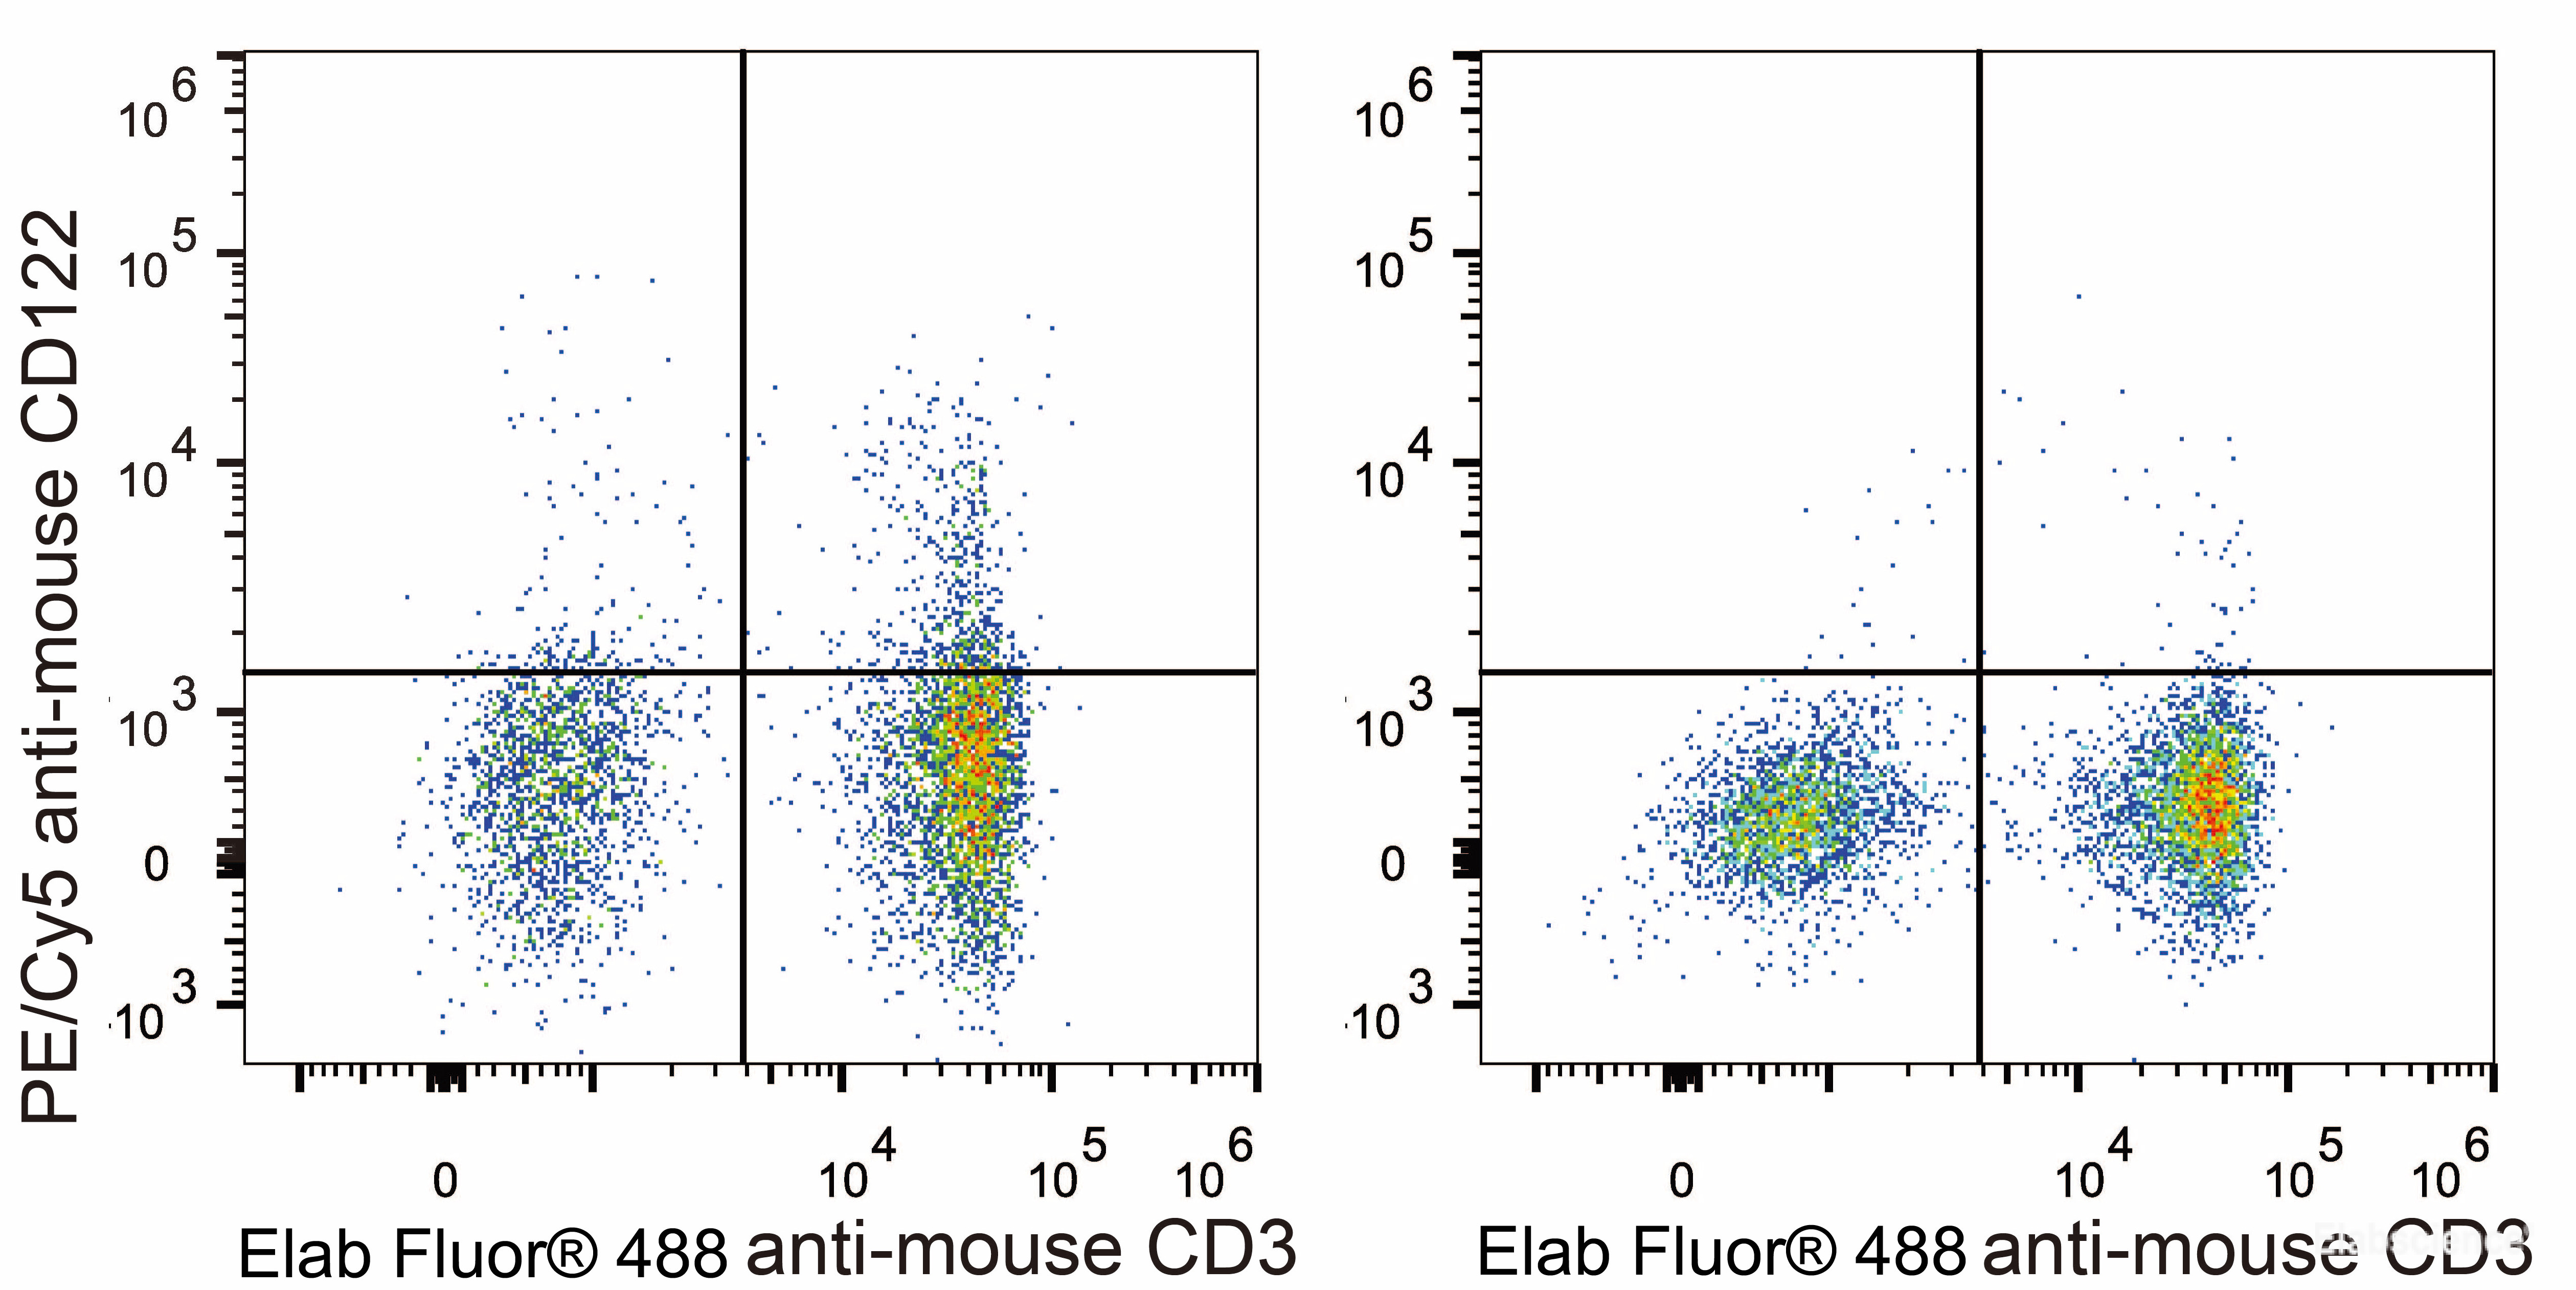 C57BL/6 murine splenocytes are stained with PE/Cyanine5 Anti-Mouse CD122 Antibody and Elab Fluor<sup>®</sup> 488 Anti-Mouse CD3 Antibody (Left). Splenocytes stained with Elab Fluor<sup>®</sup> 488 Anti-Mouse CD3 Antibody (Right) are used as control.